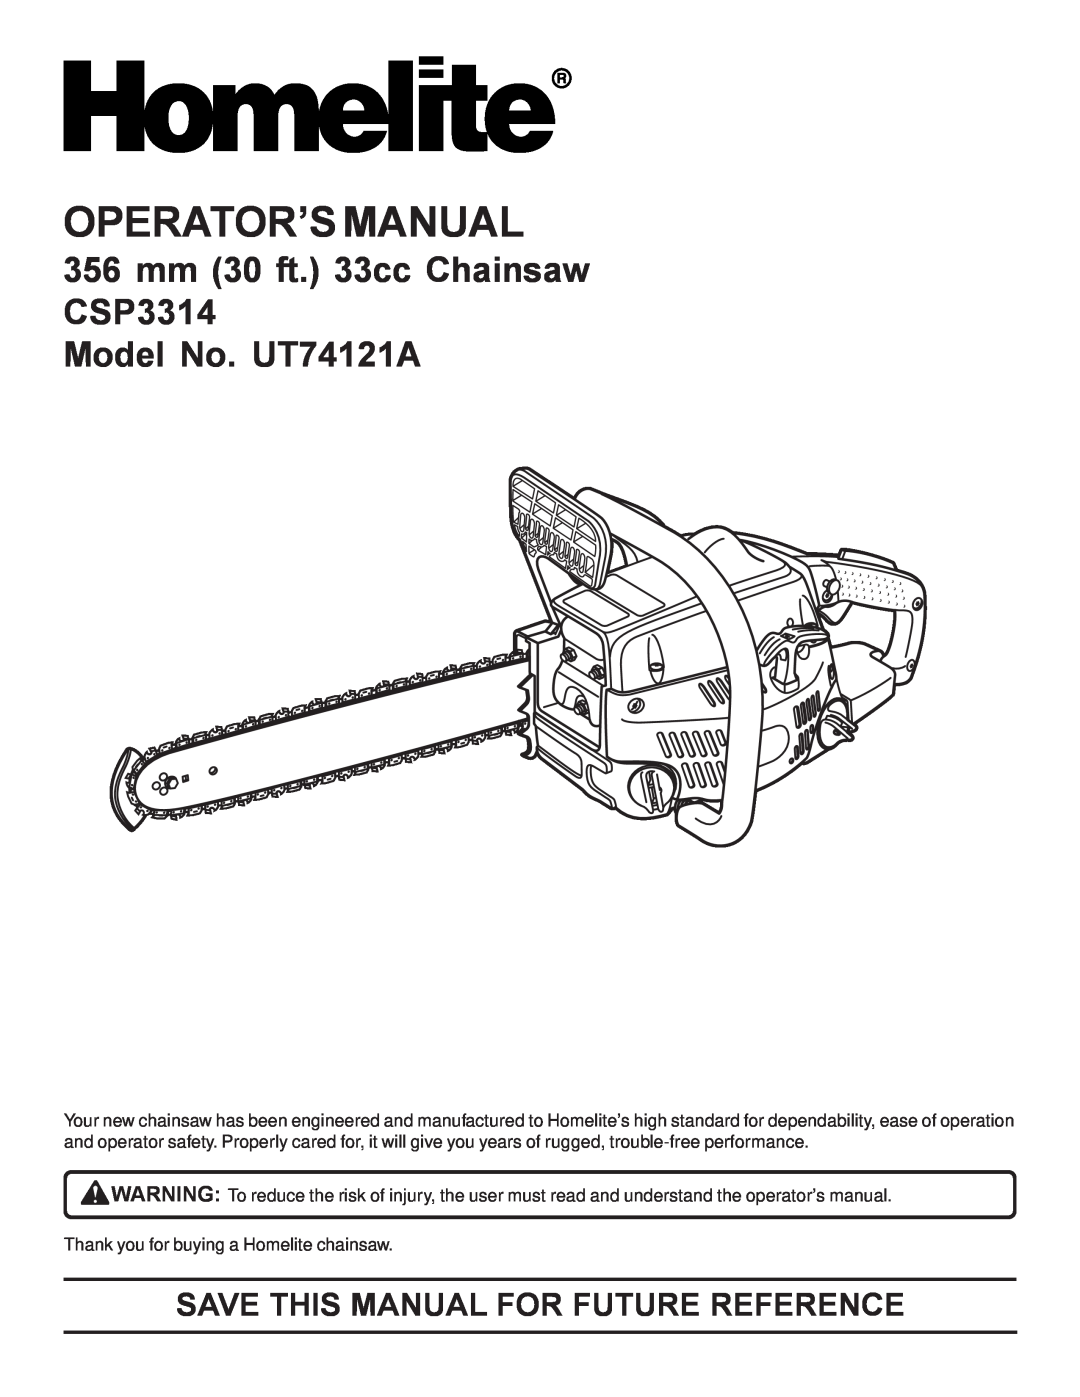 Homelite manual Operator’S Manual, 356 mm 30 ft. 33cc Chainsaw CSP3314 Model No. UT74121A 